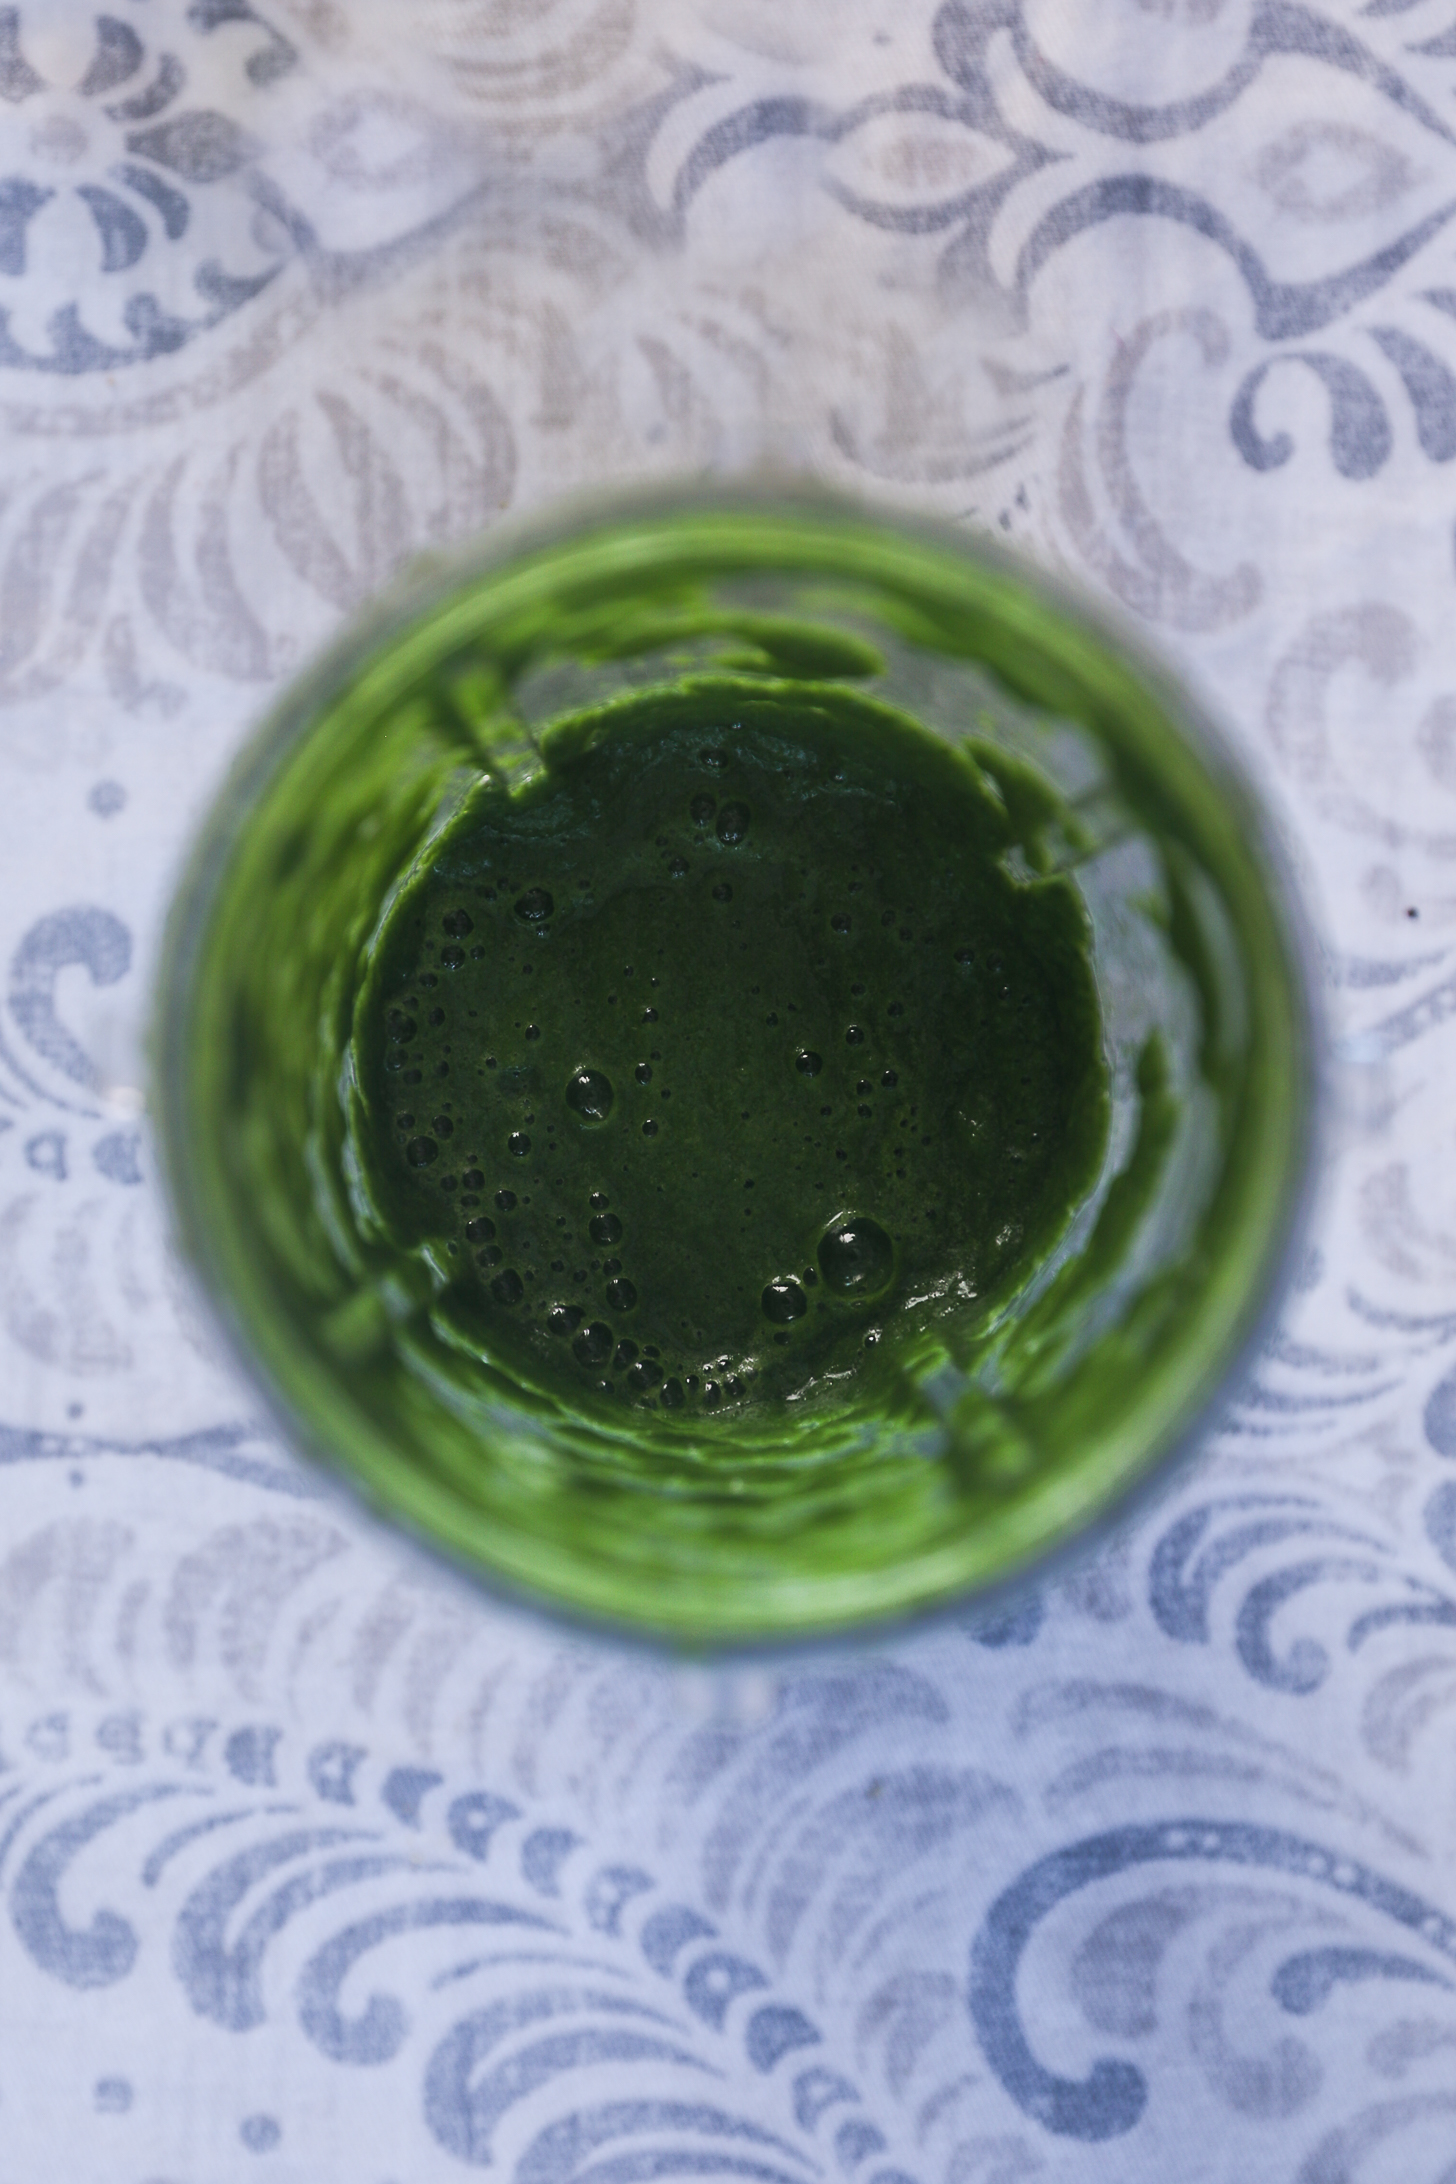 Top view image of a blender cup of green chutney with bubbles on top.